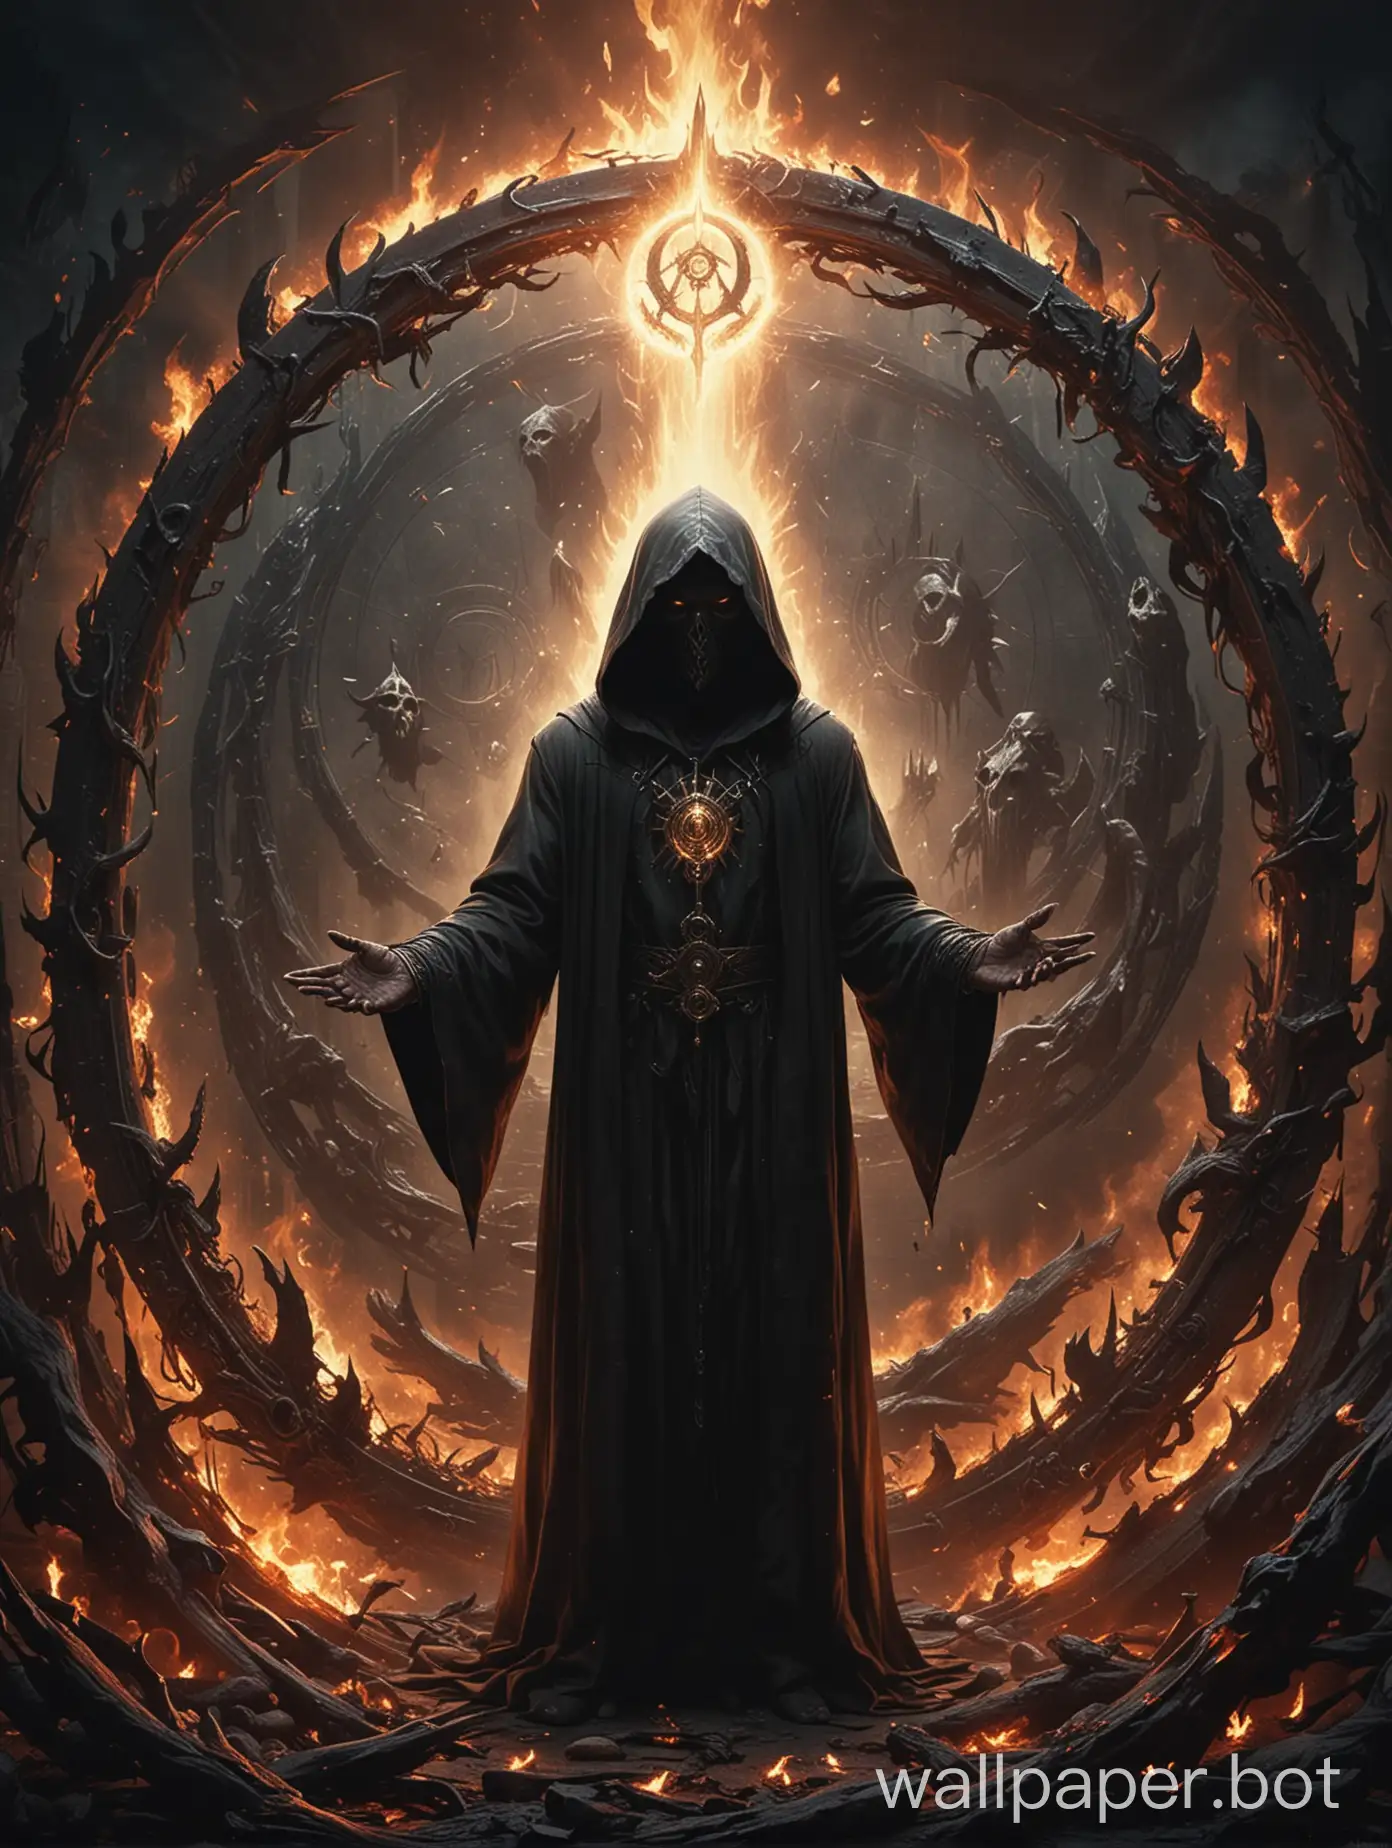 Occultist-Summoning-Sacred-Flame-with-Creatures-in-Dark-Metal-Music-Art